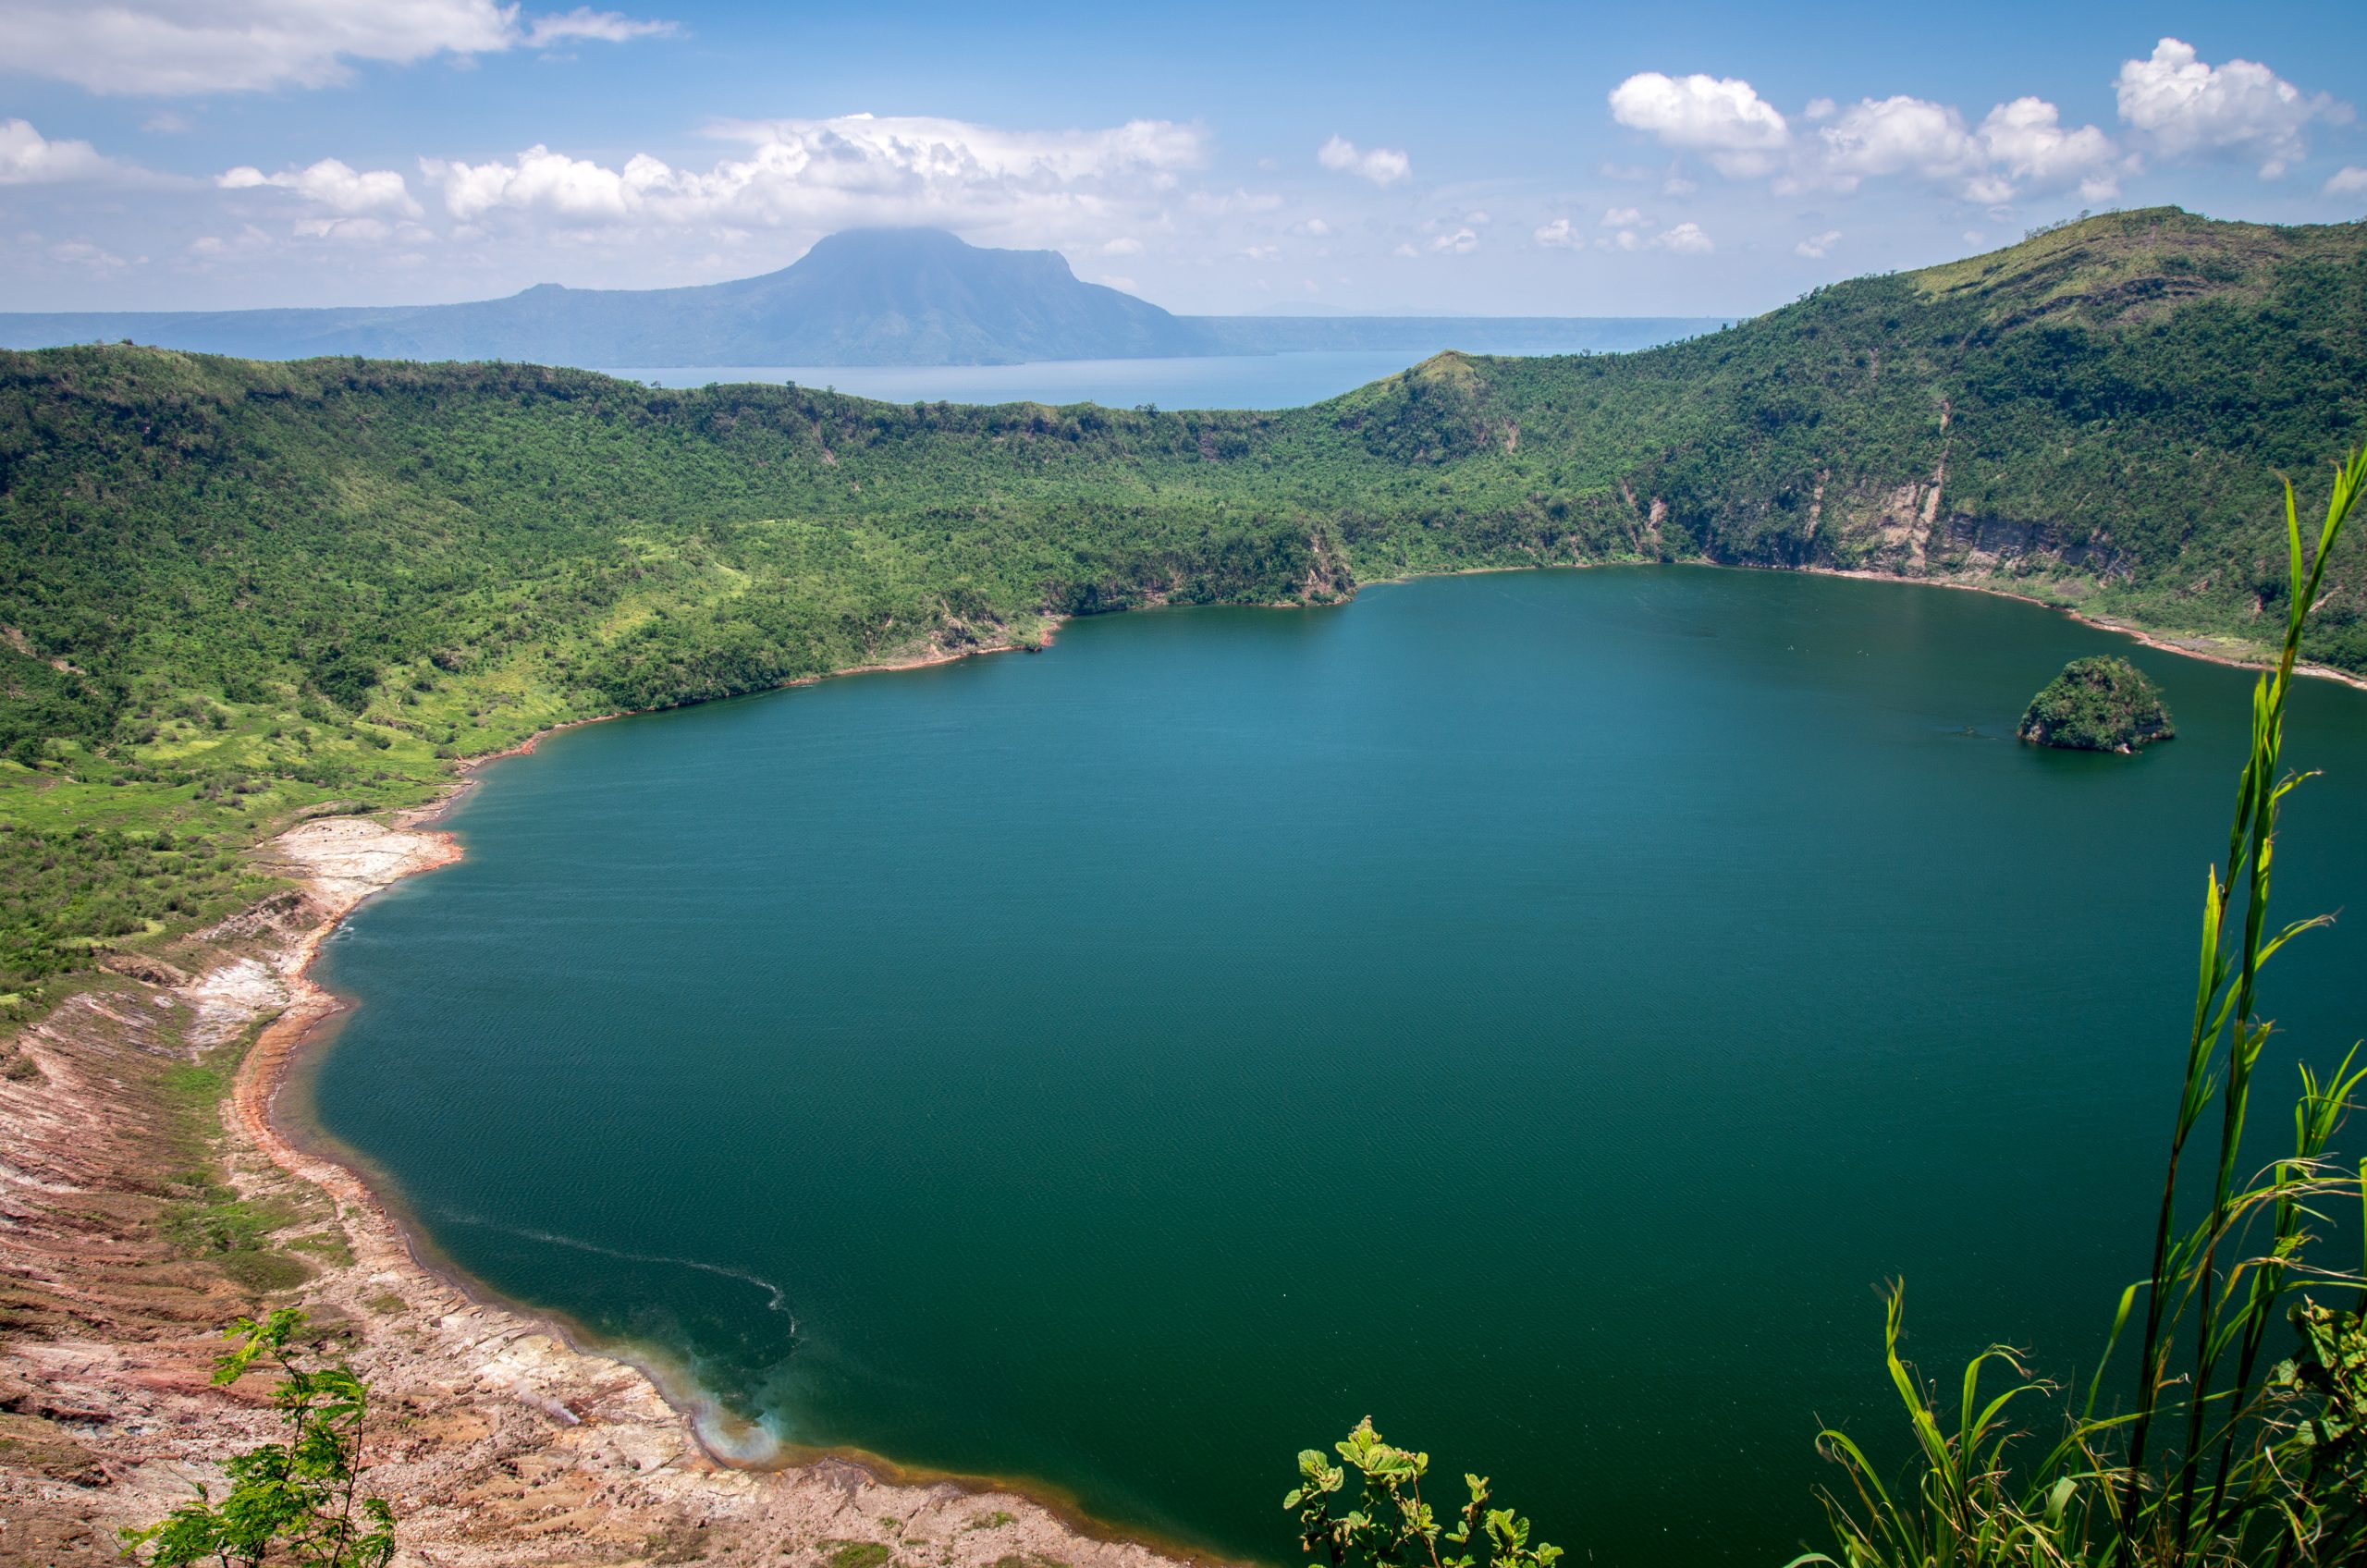 taal_volcano_crater_lake_8-8-2014